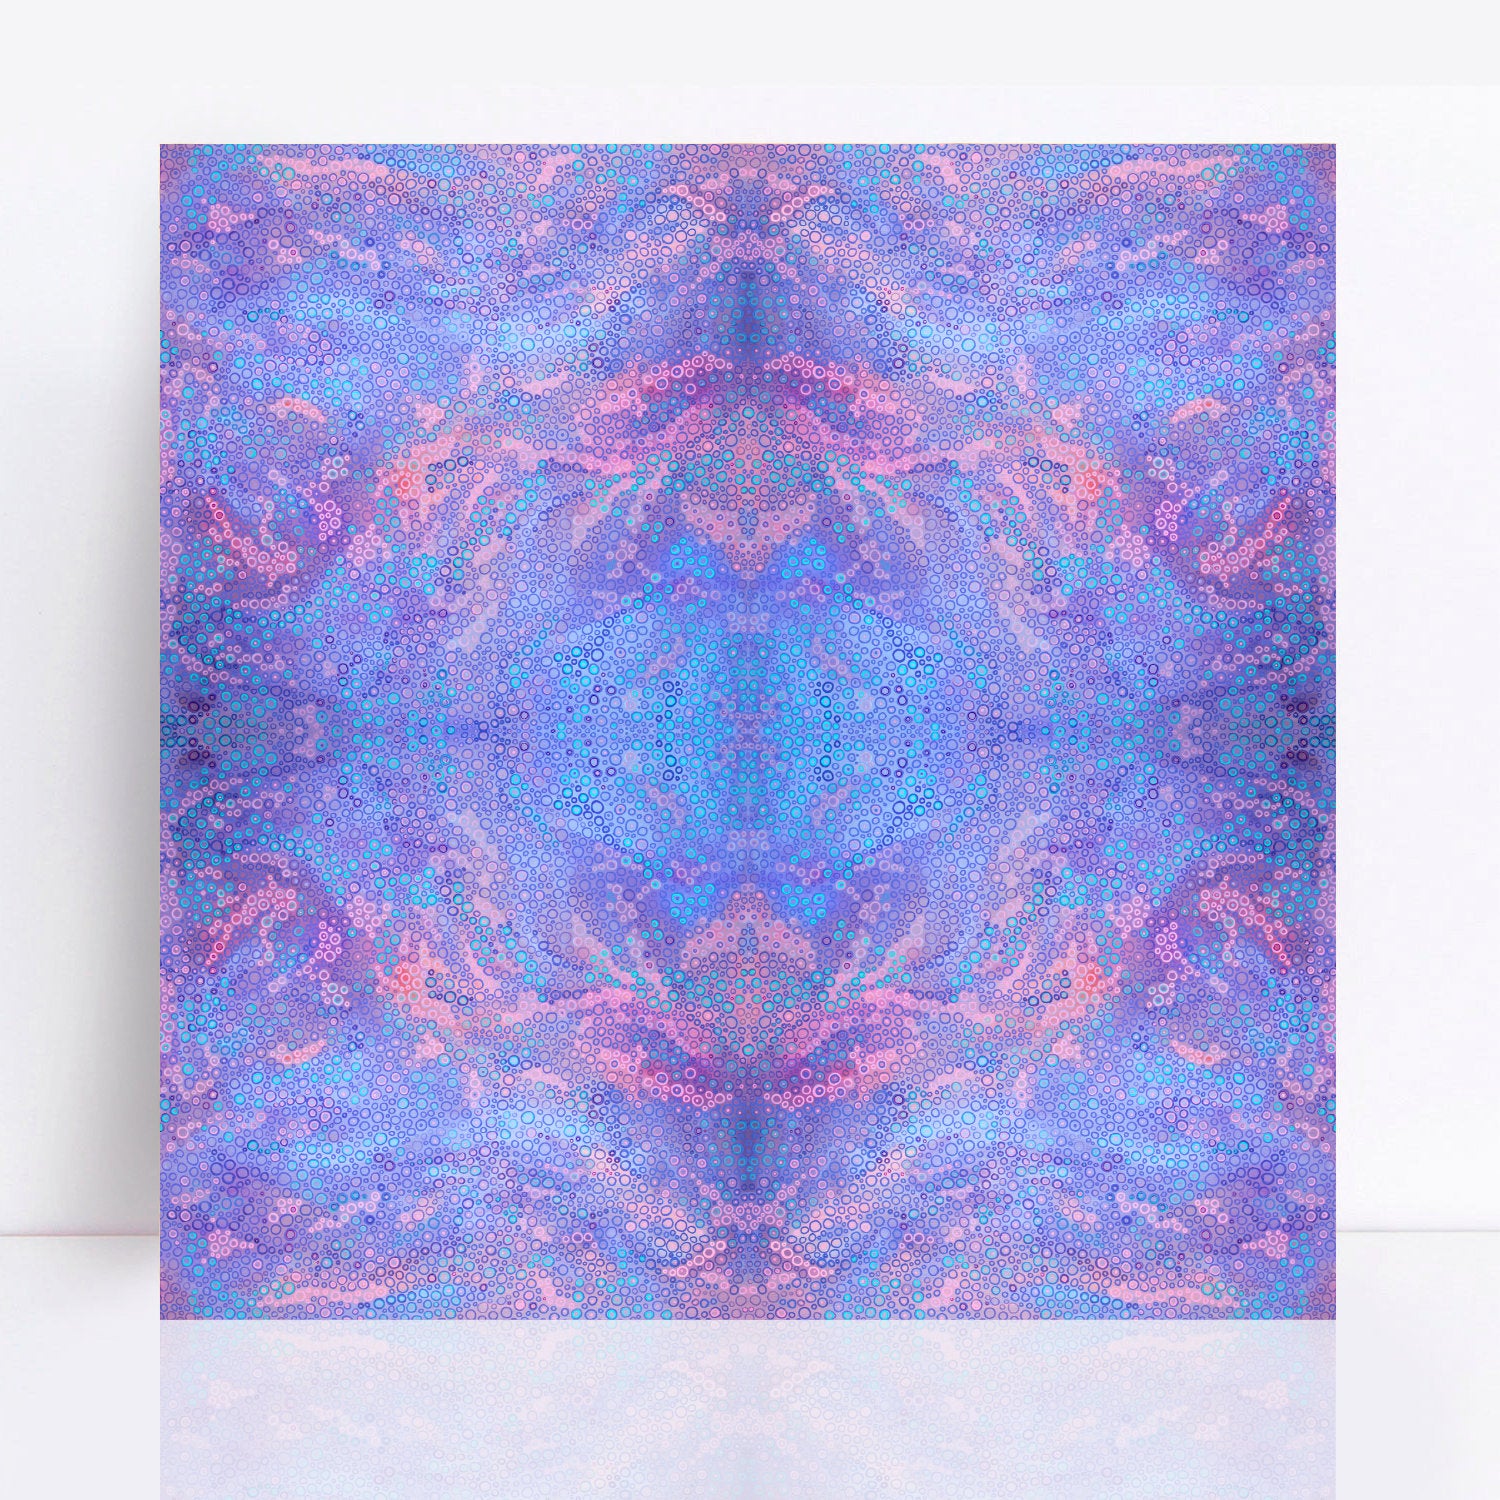 A limited edition print titled "Jacaranda Blue," featuring a colourful abstract design with hundreds of meticulously arranged dots and circles in various sizes. The artwork showcases a harmonious blend of bluish-purple and soft pink tones, inspired by the hues of flowering jacaranda trees. The print is displayed against a white background, highlighting its intricate and captivating design.